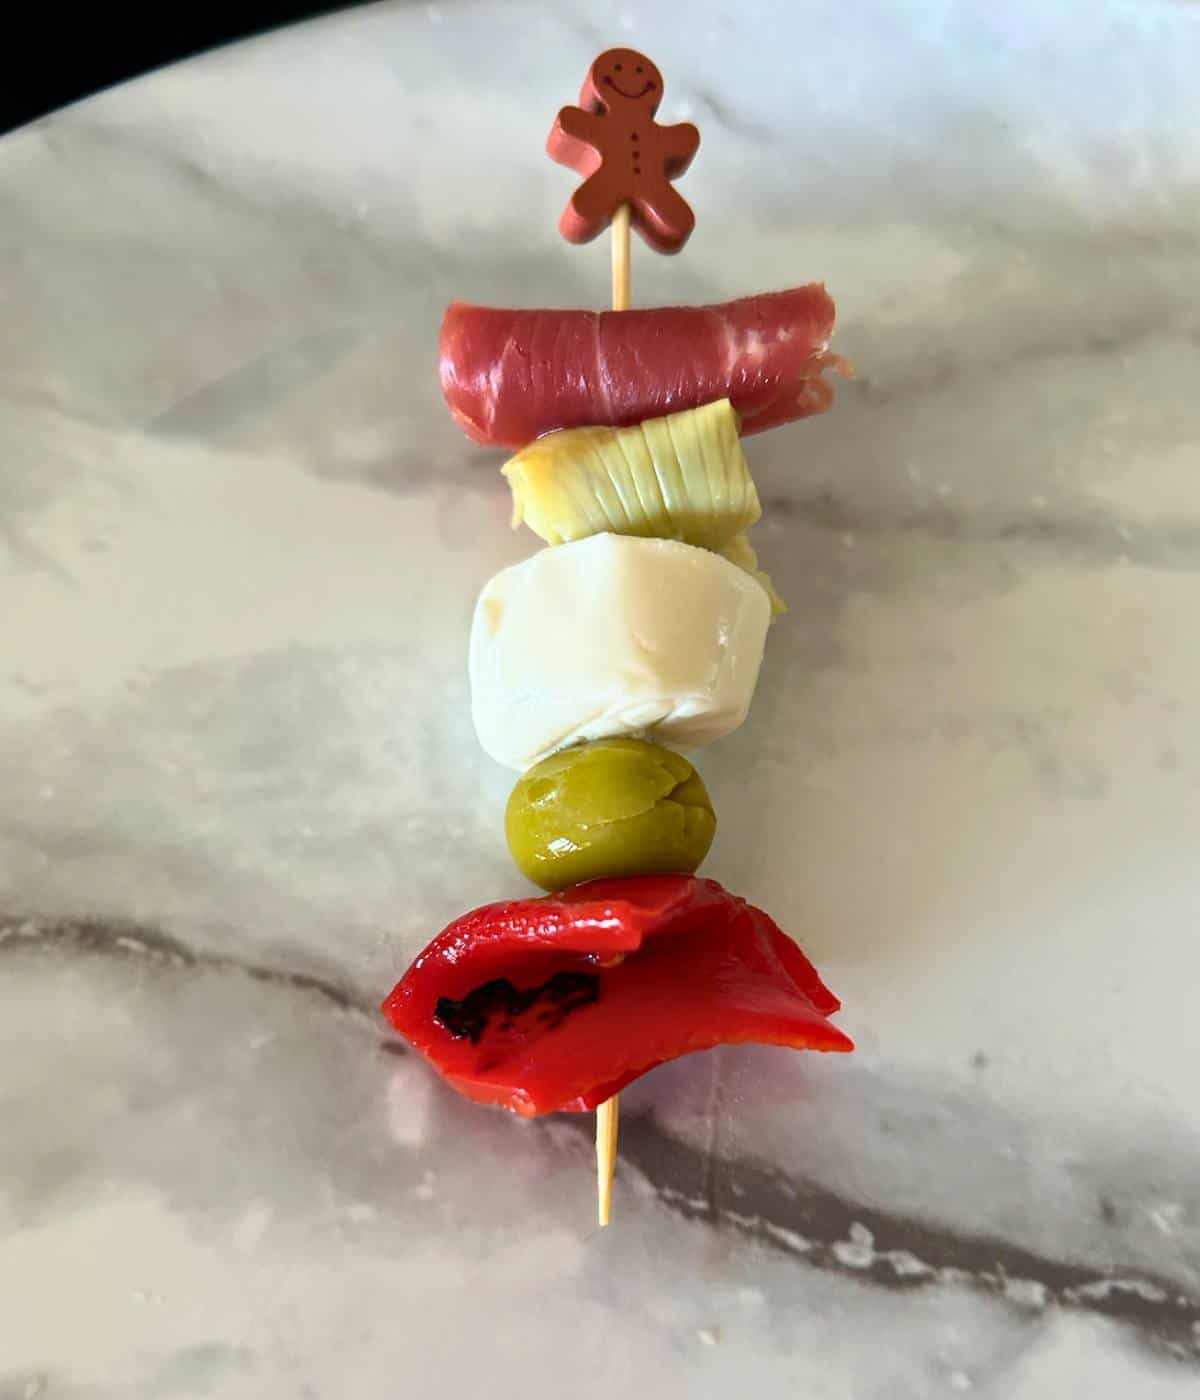 Charcuterie skewer with red peppers, olive, mozzarella, artichoke and prosciutto on stick.